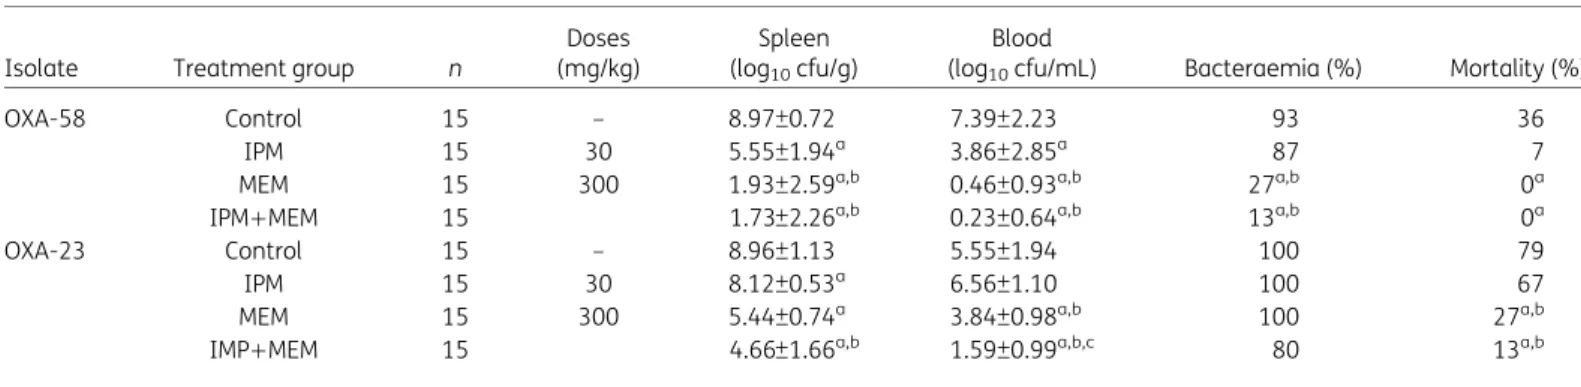 Table 1. Efficacy of imipenem and meropenem, alone and in combination, in the experimental peritoneal sepsis models with carbapenem-resistant A